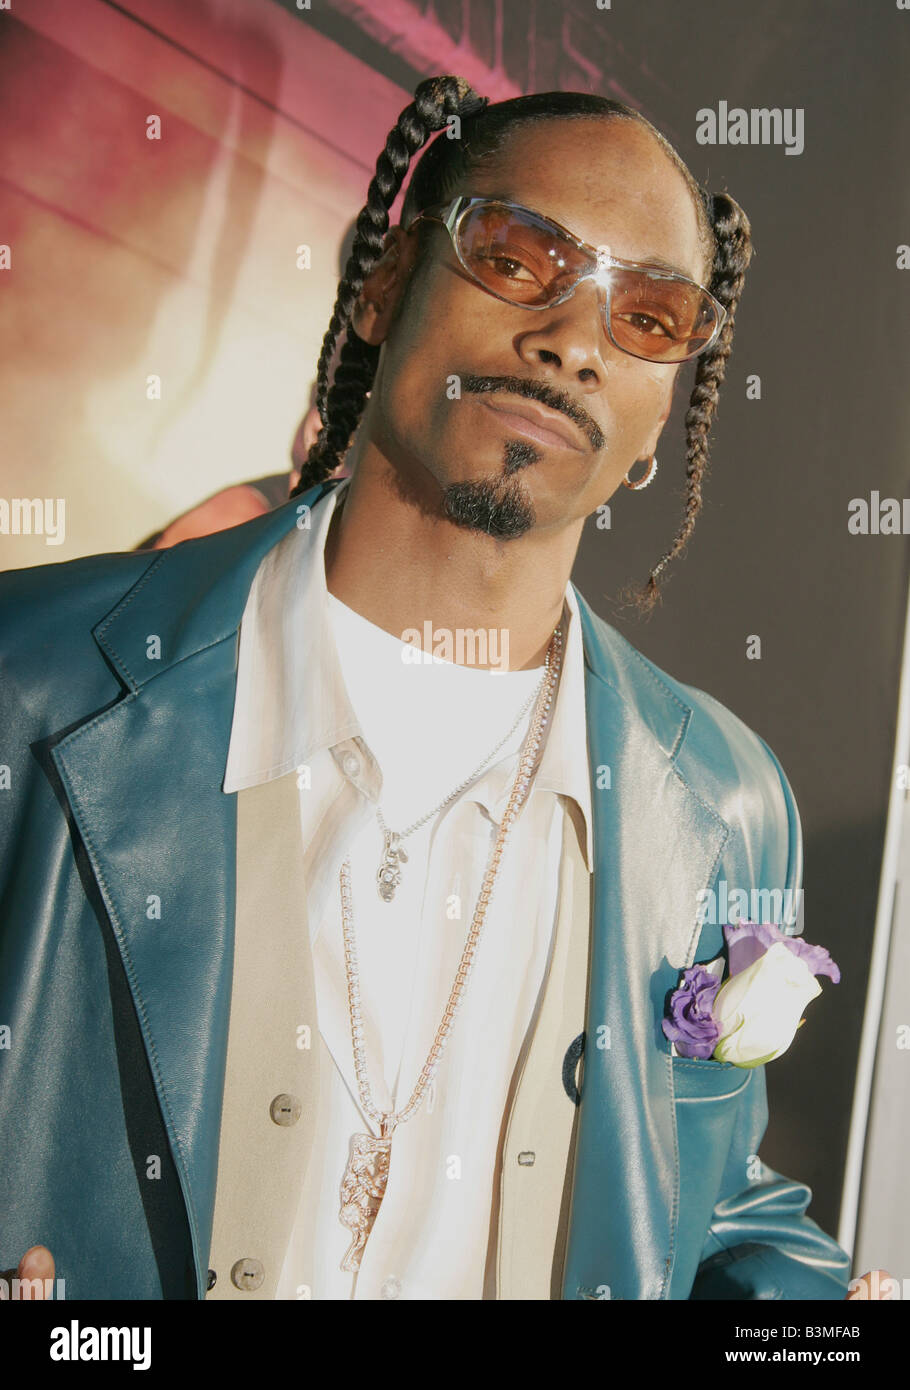 SNOOP DOGG  US rapper in 2004 Stock Photo